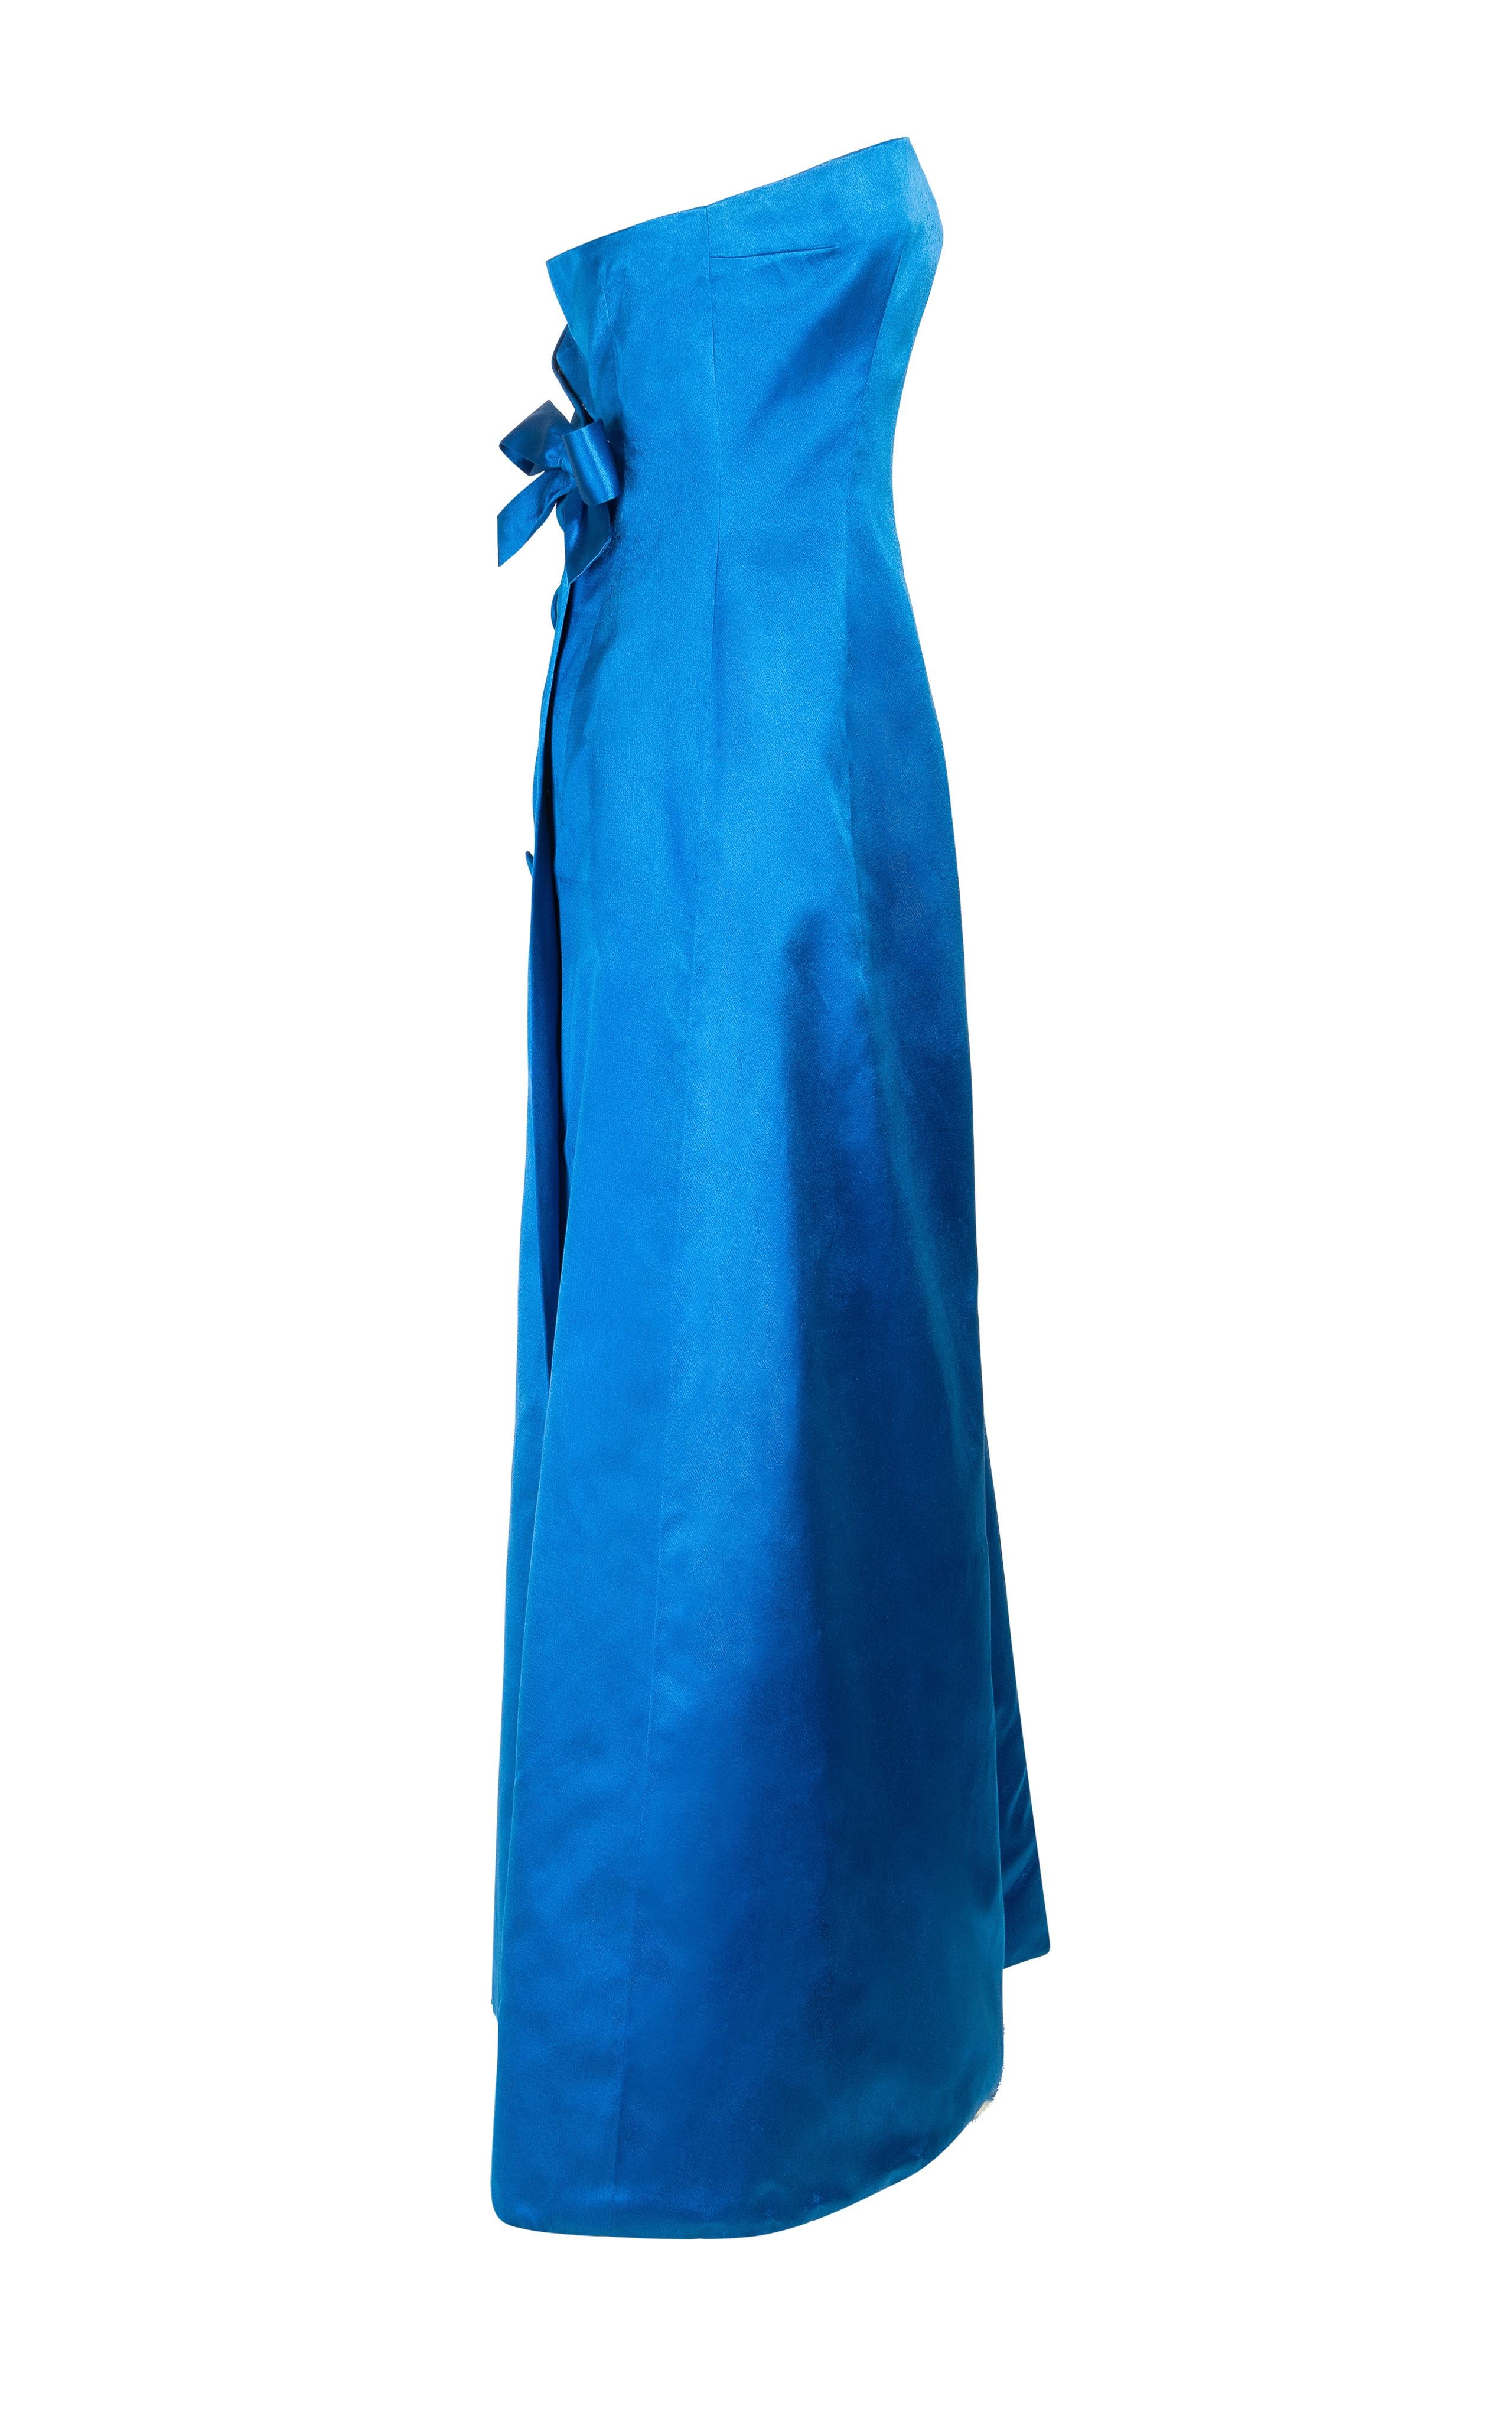 c. 1959 Jean Patou by Karl Lagerfeld Couture strapless blue satin evening sheath gown. Matching oversized fabric buttons and large bow at back. Subtle wrap-like effect at back with cross-over at side-back. Built-in nude mesh corset with boning and